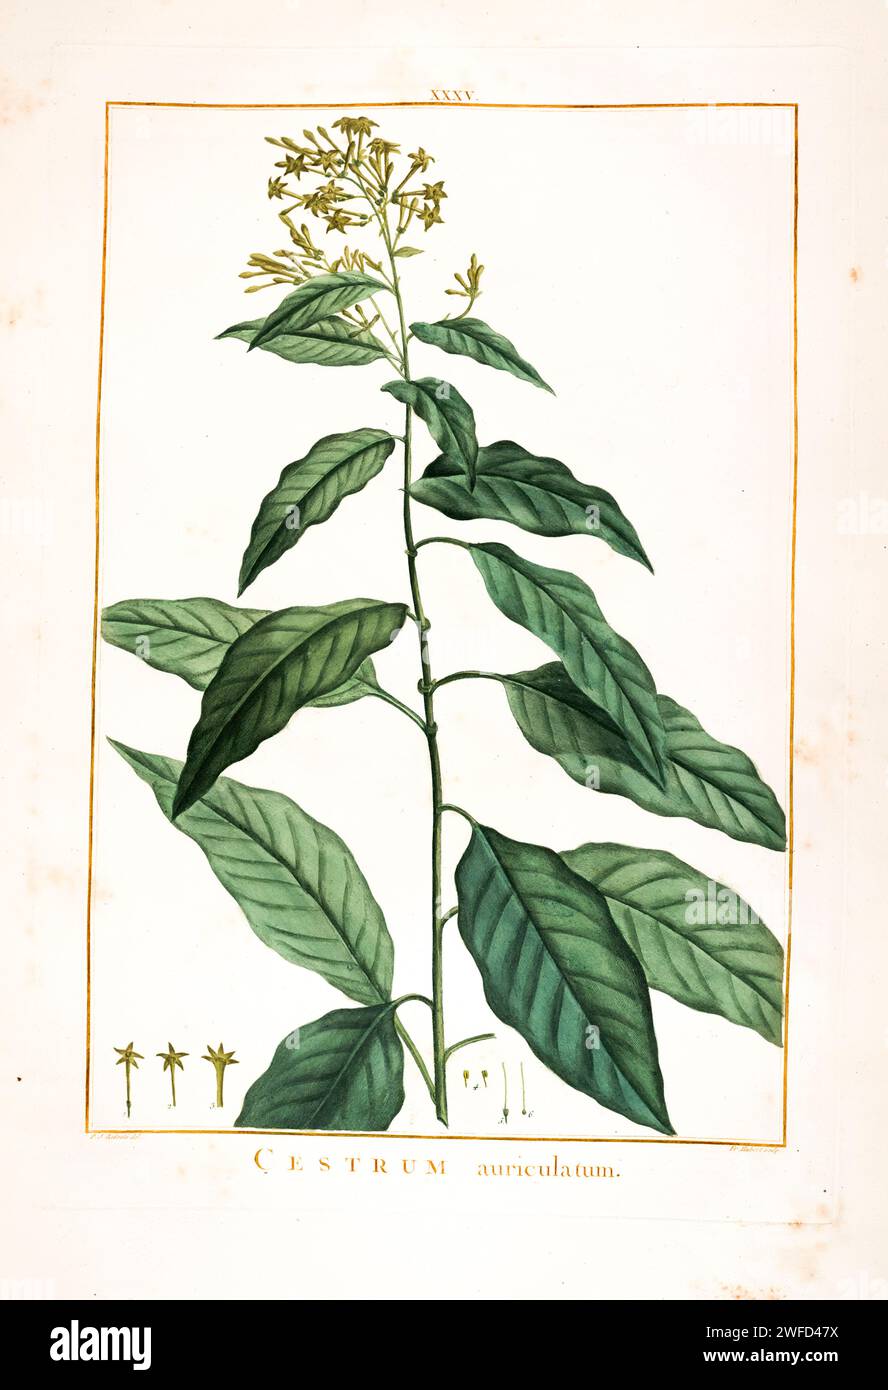 Cestrum auriculatum syn Cestrum aurantiacum Hand Painted by Pierre-Joseph Redouté and published in Stirpes Novae aut Minus Cognitae (1784) by Charles Louis L'Héritier de Brutelle. Cestrum is a genus of 150-250 species of flowering plants in the family Solanaceae. They are native to warm temperate to tropical regions of the Americas, Stock Photo